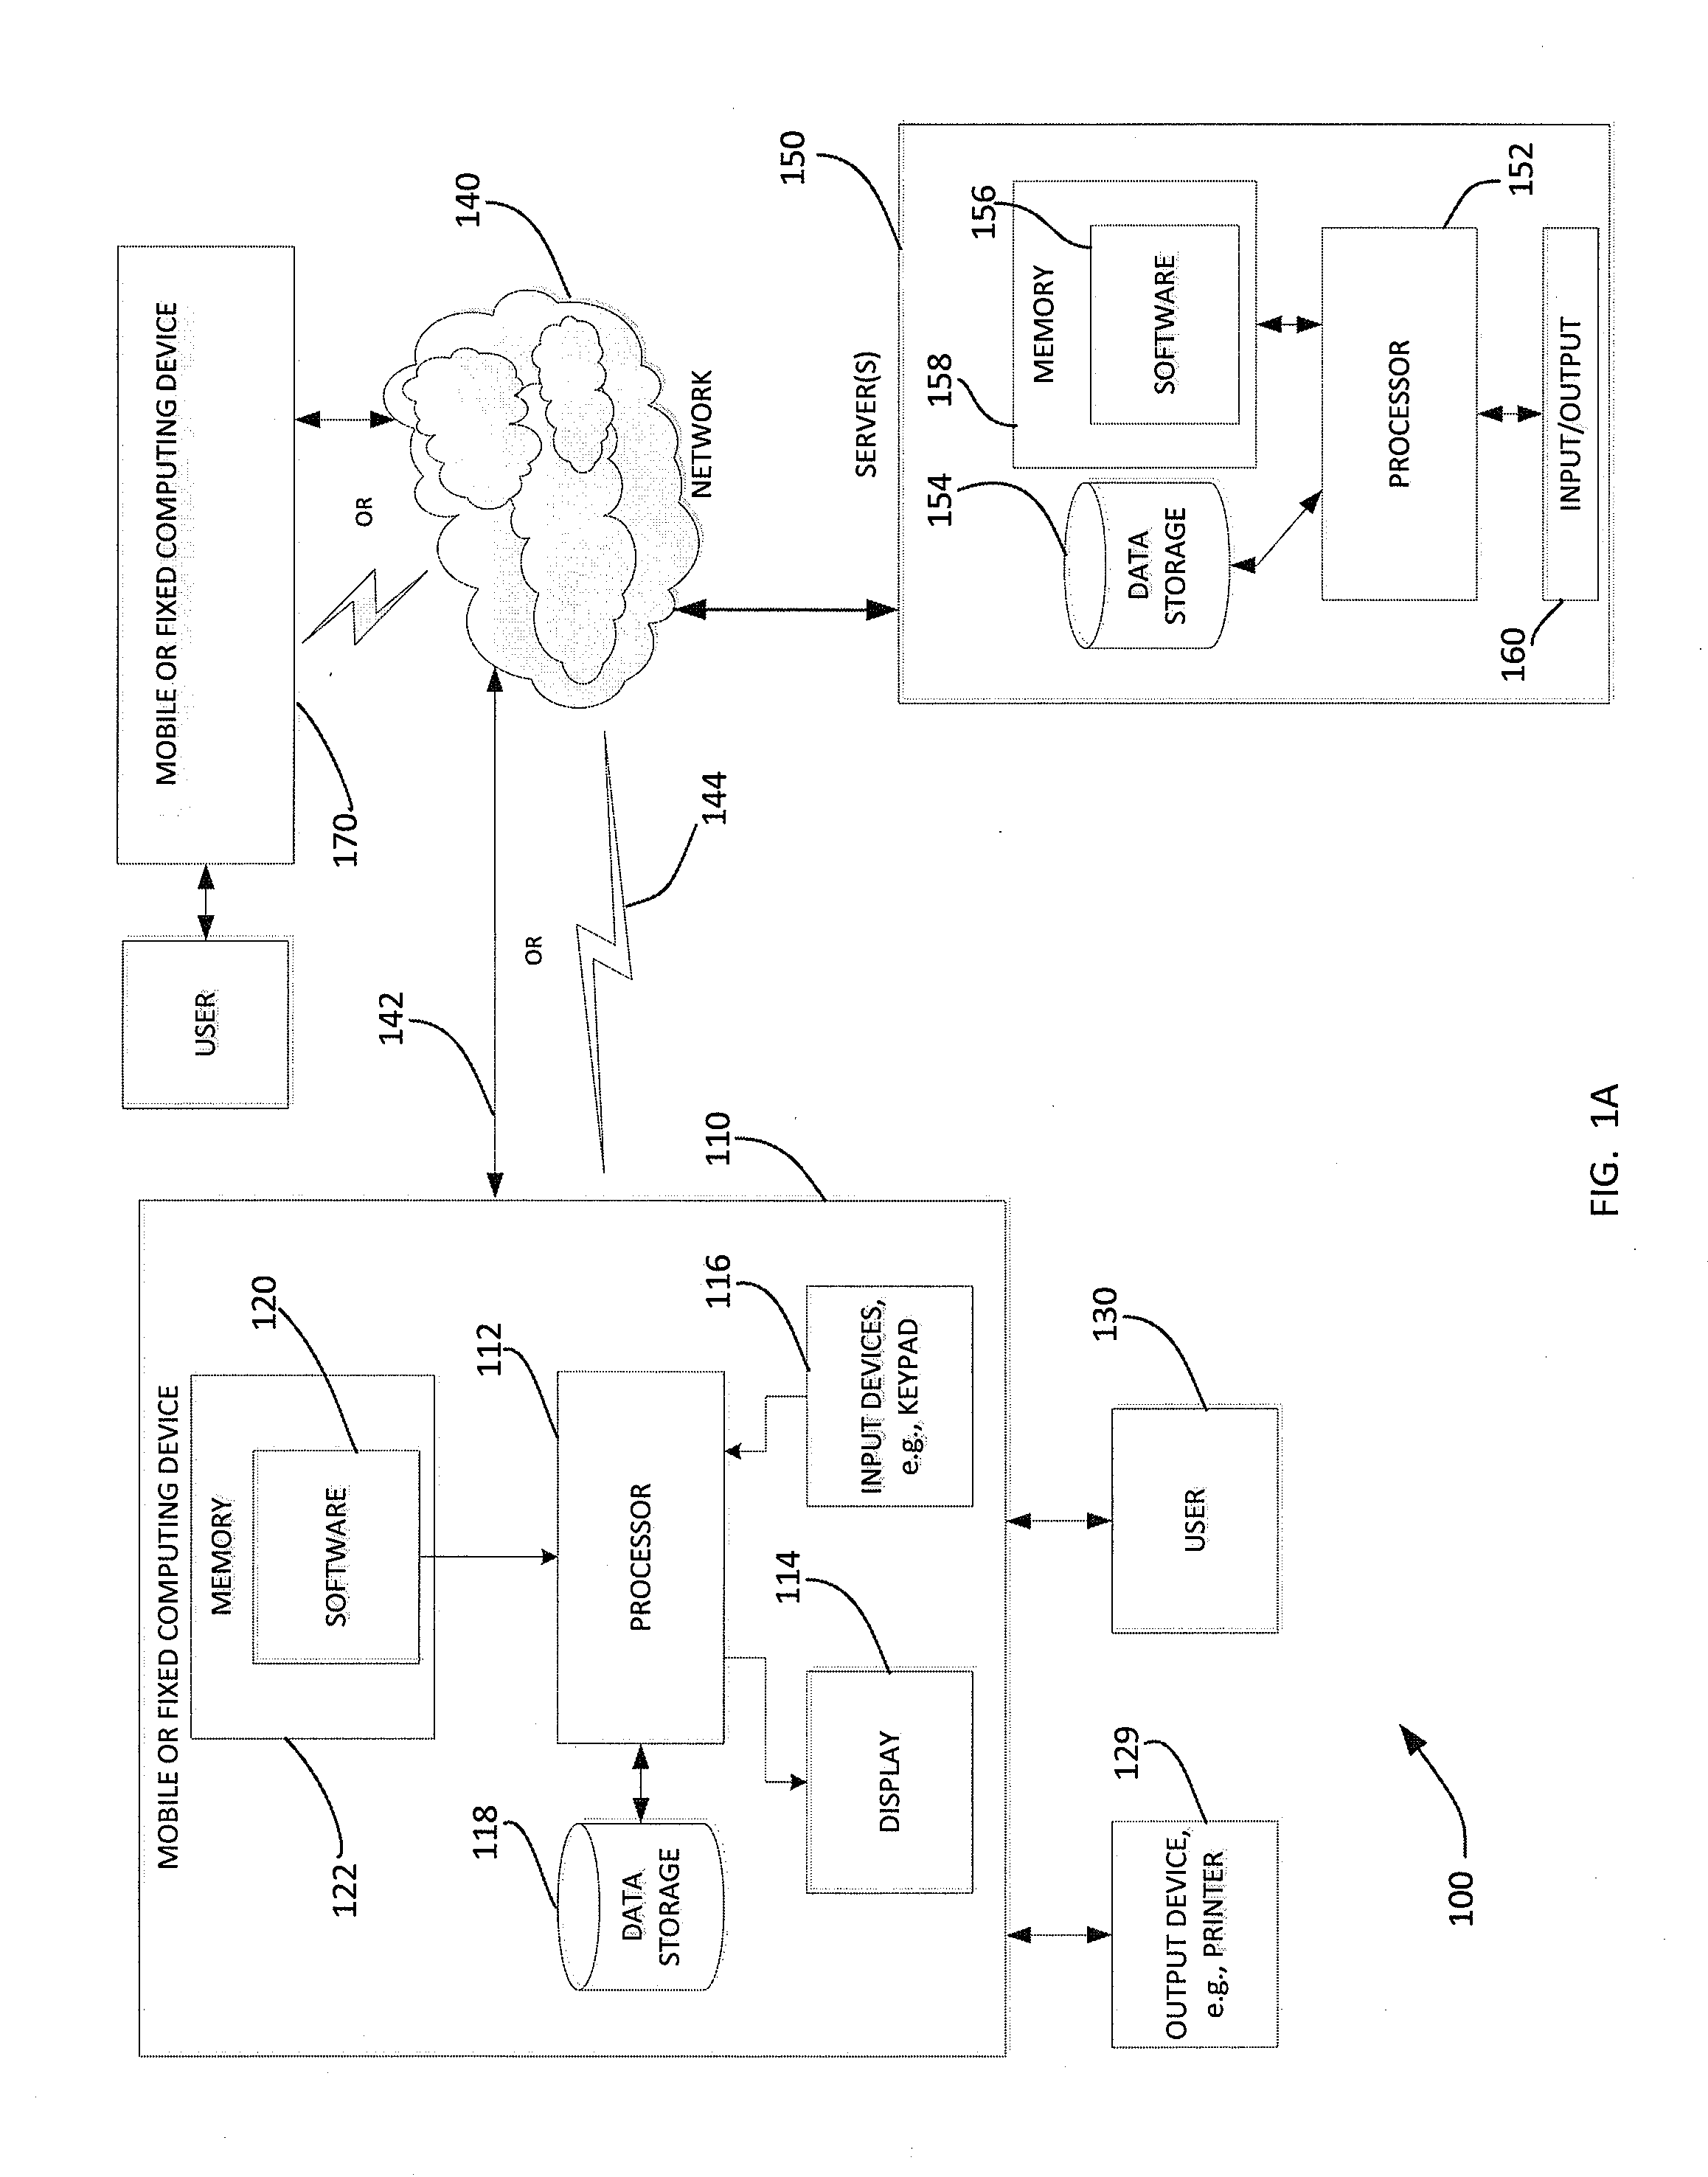 Genetic database system and method